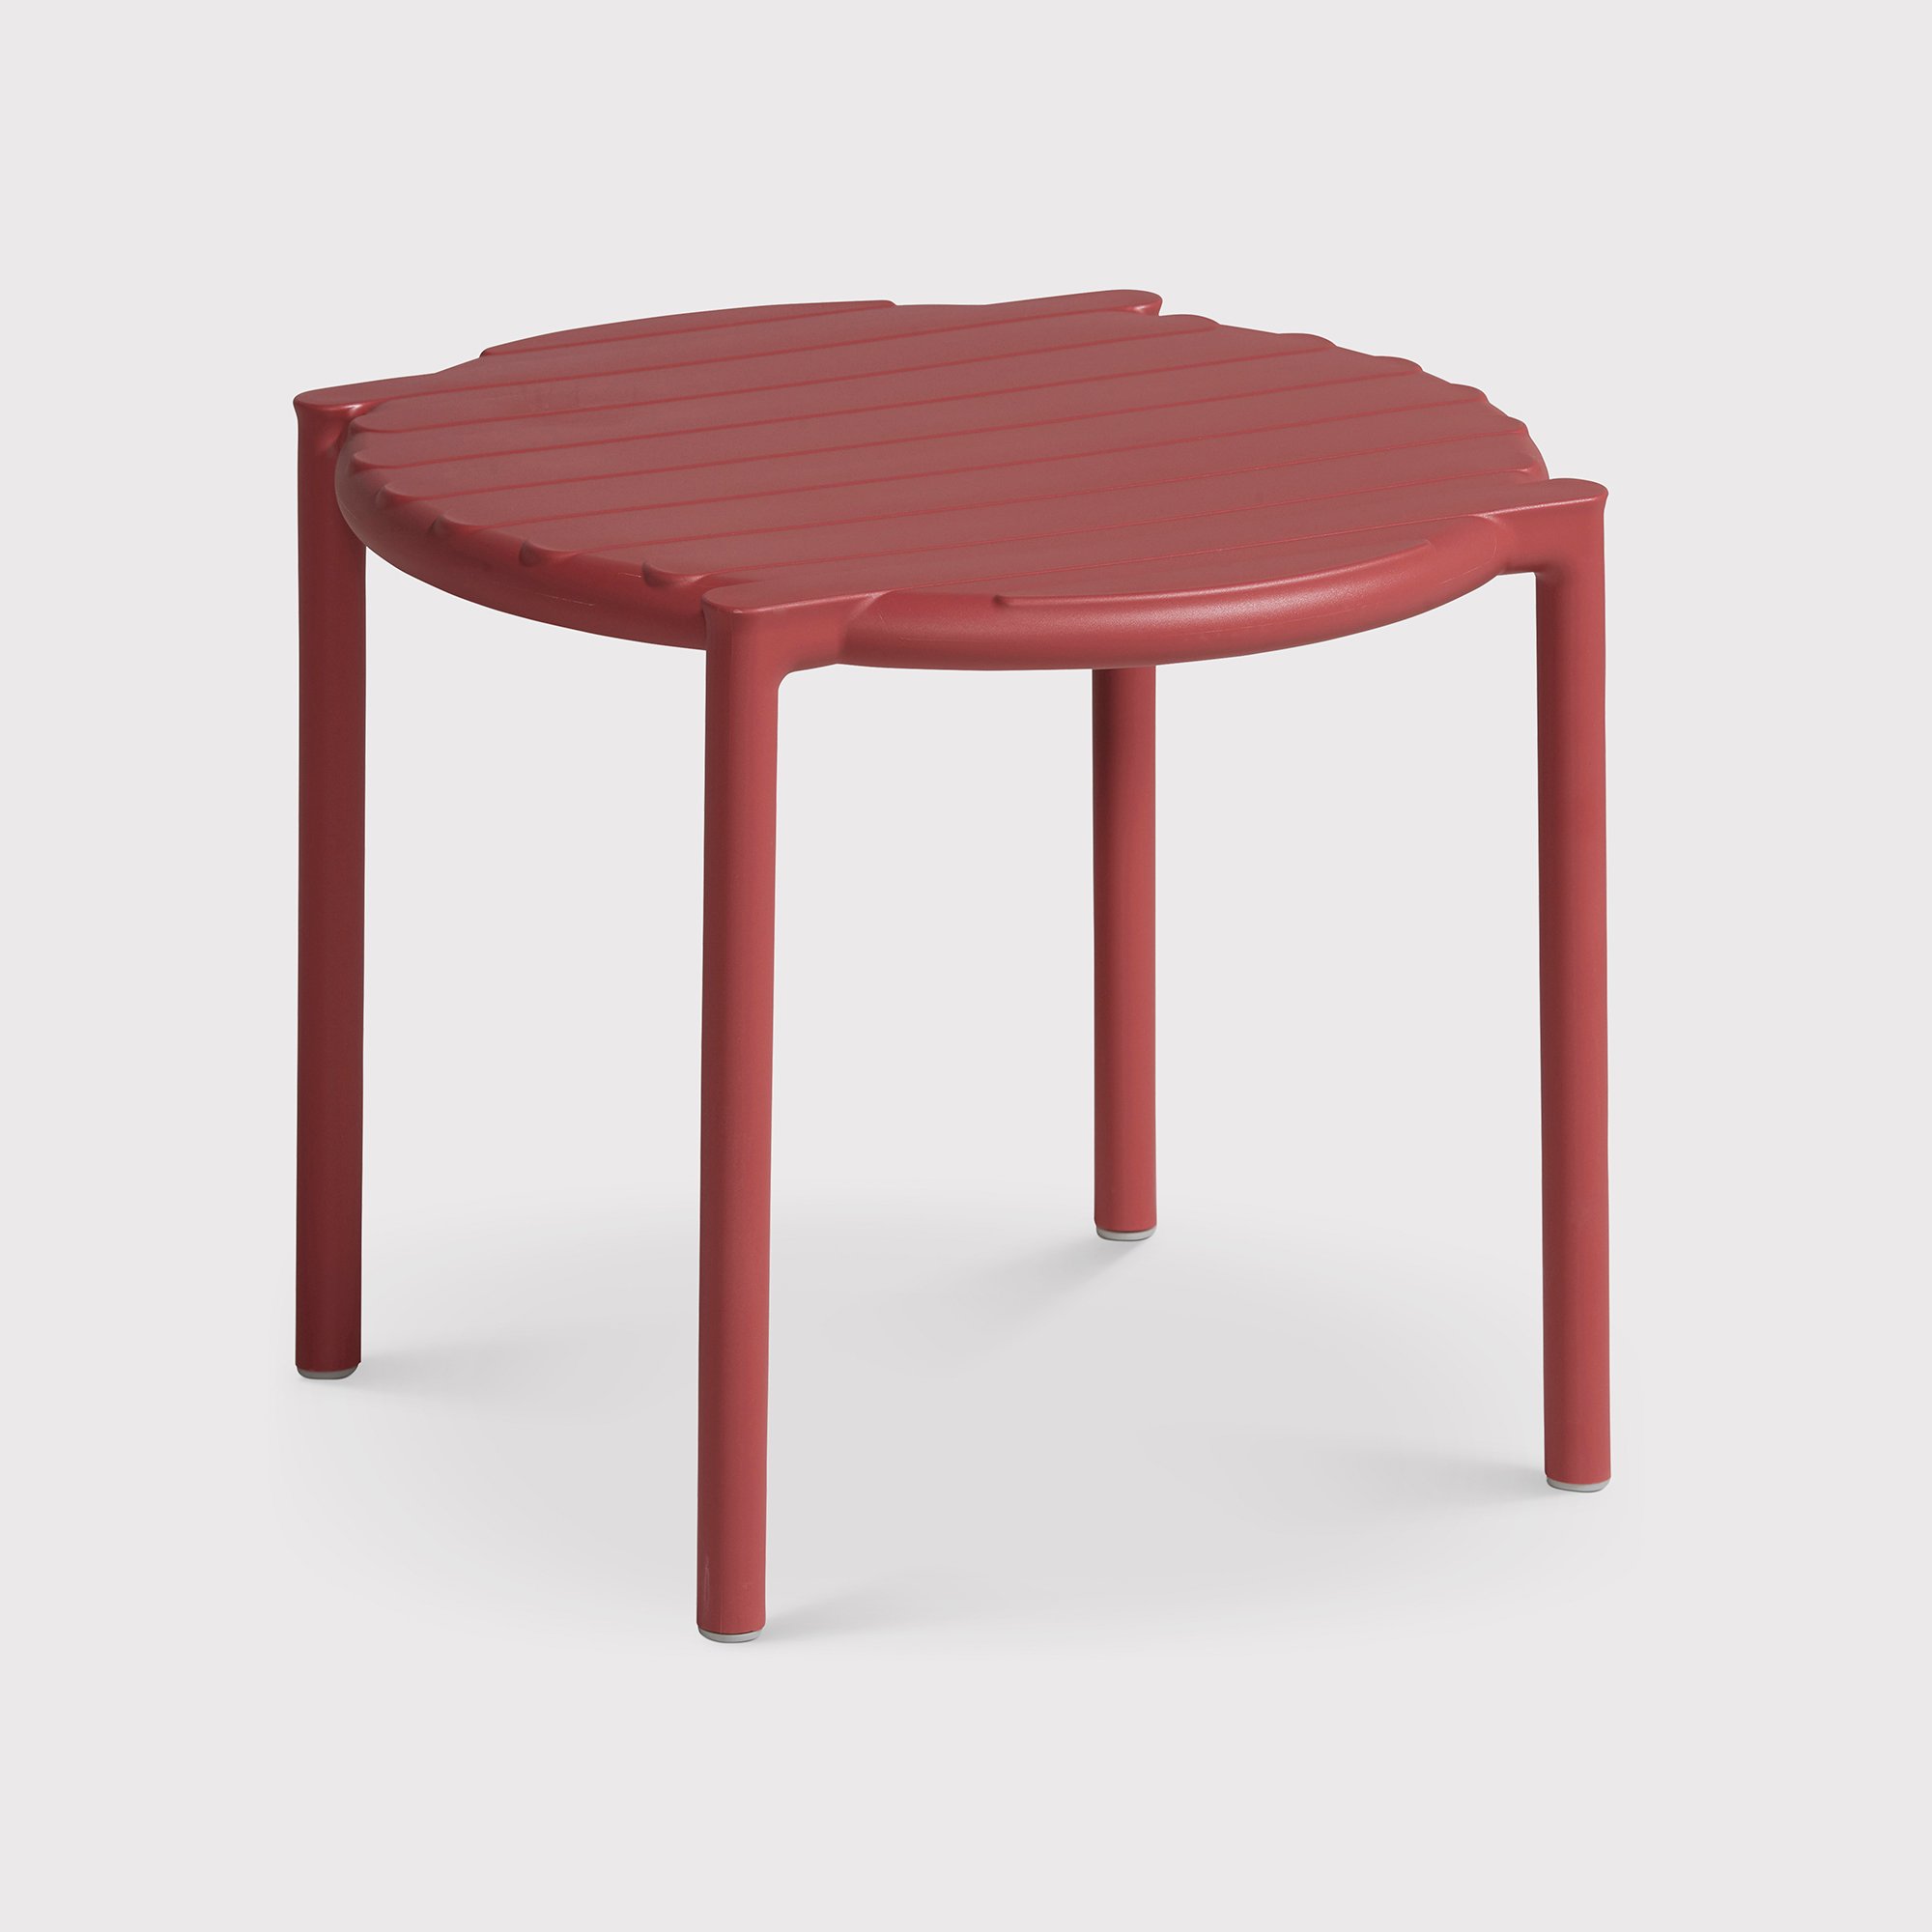 Photo of Lima table with 2 cassis chairs in round in red